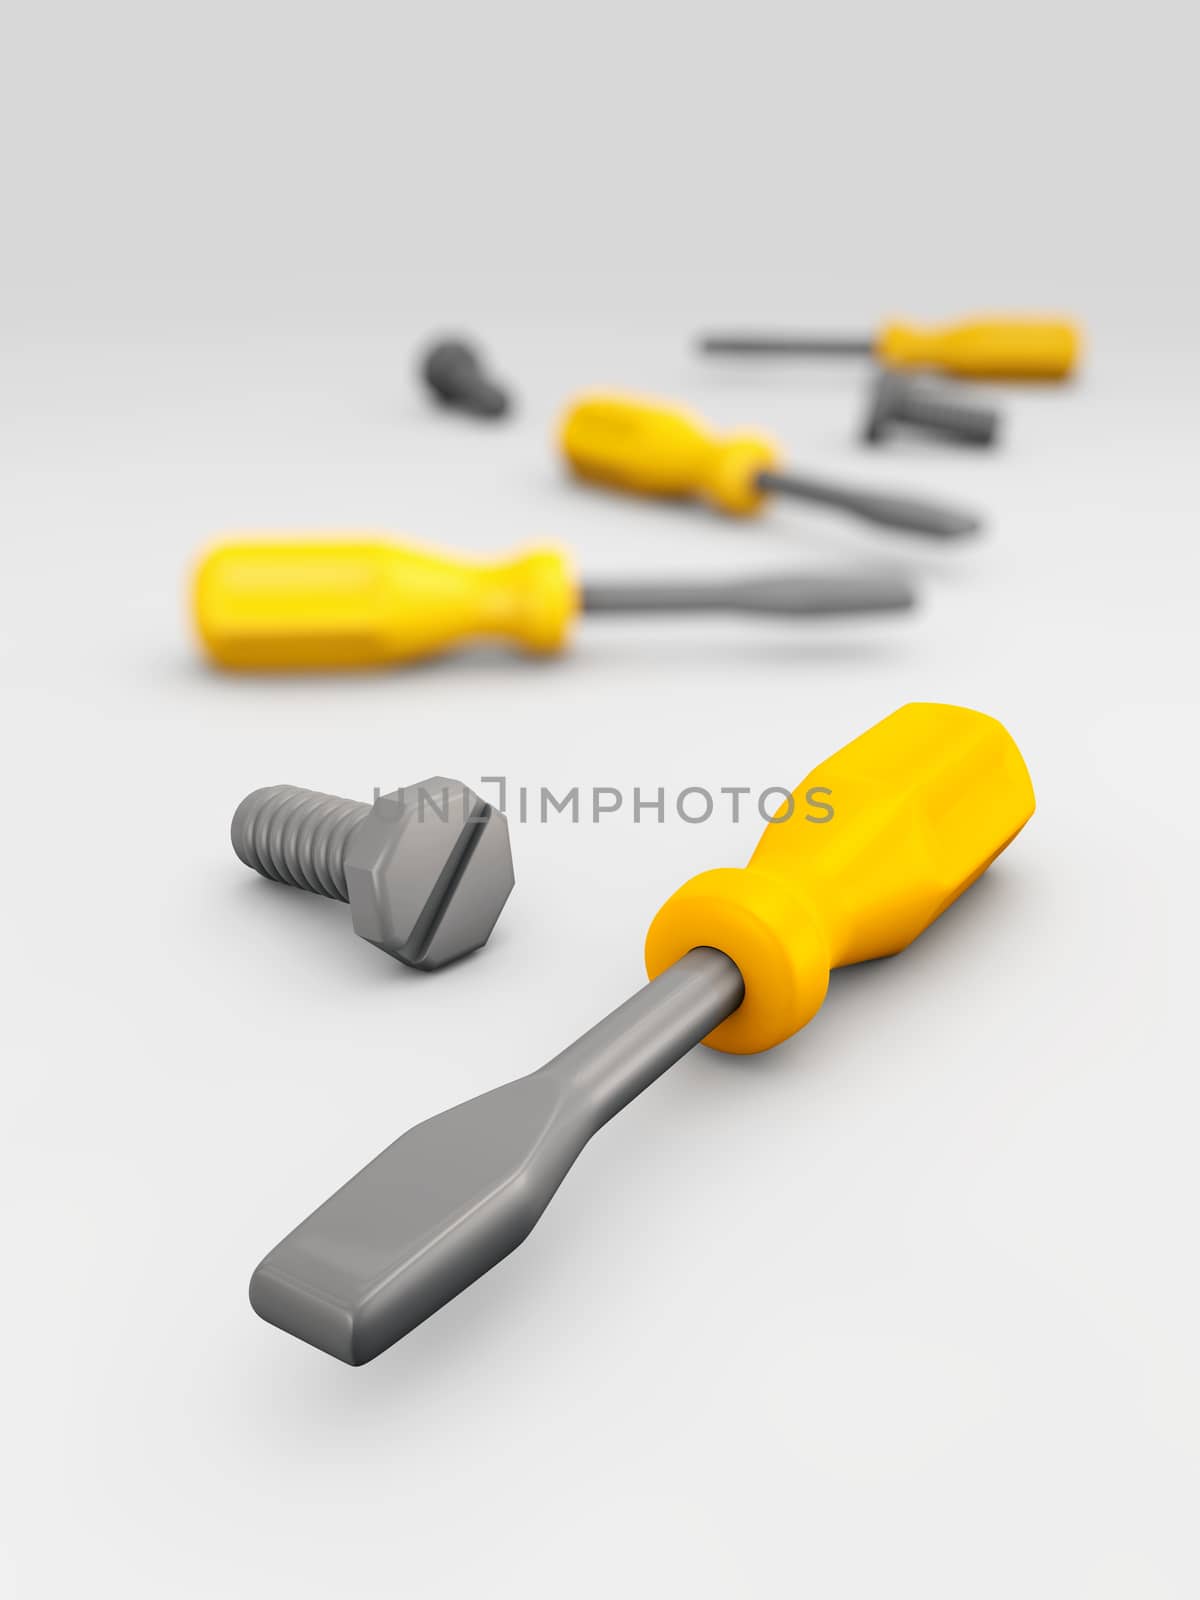 3d Illustration of screwdrivers and bolts, Repair and maintenance concept.